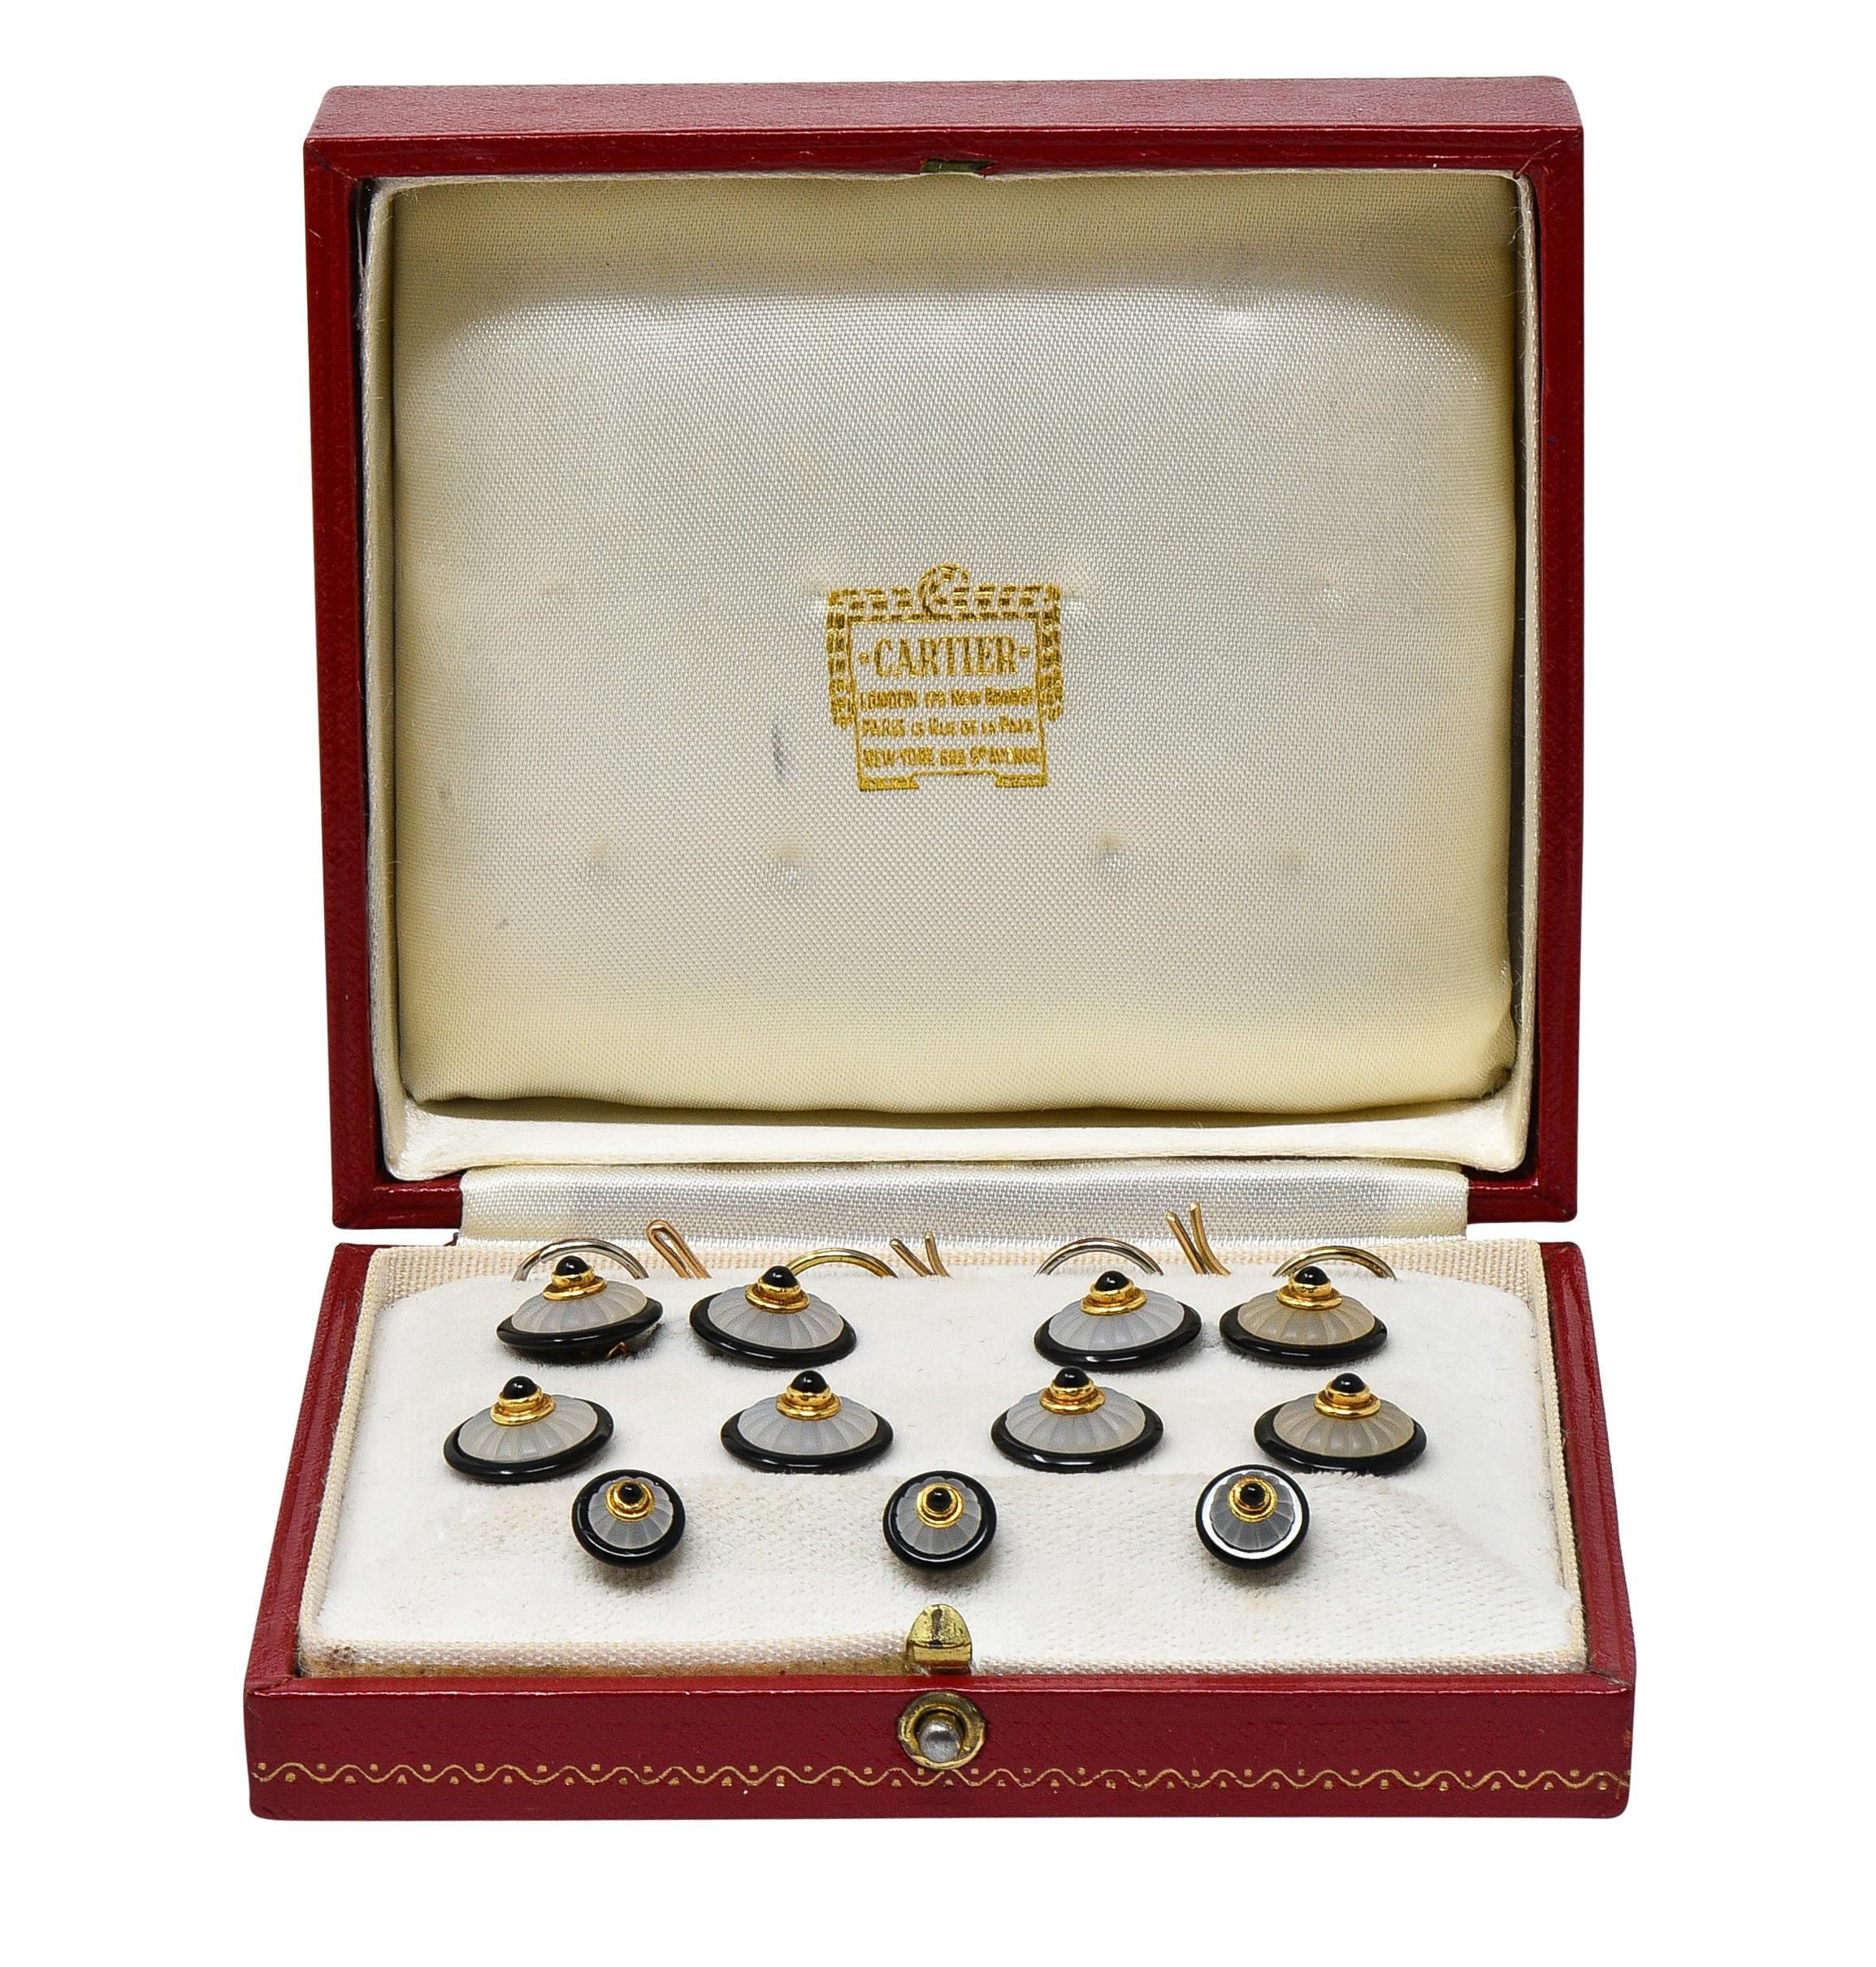 Designed as a full dress set, including bar and link cufflinks, shirt studs, and fasteners 
Comprised of matching round onyx disks centering 1.5 to 2.5 mm onyx cabochons
Set in gold bezels atop dome-shaped rock crystal quartz - carved with fluted